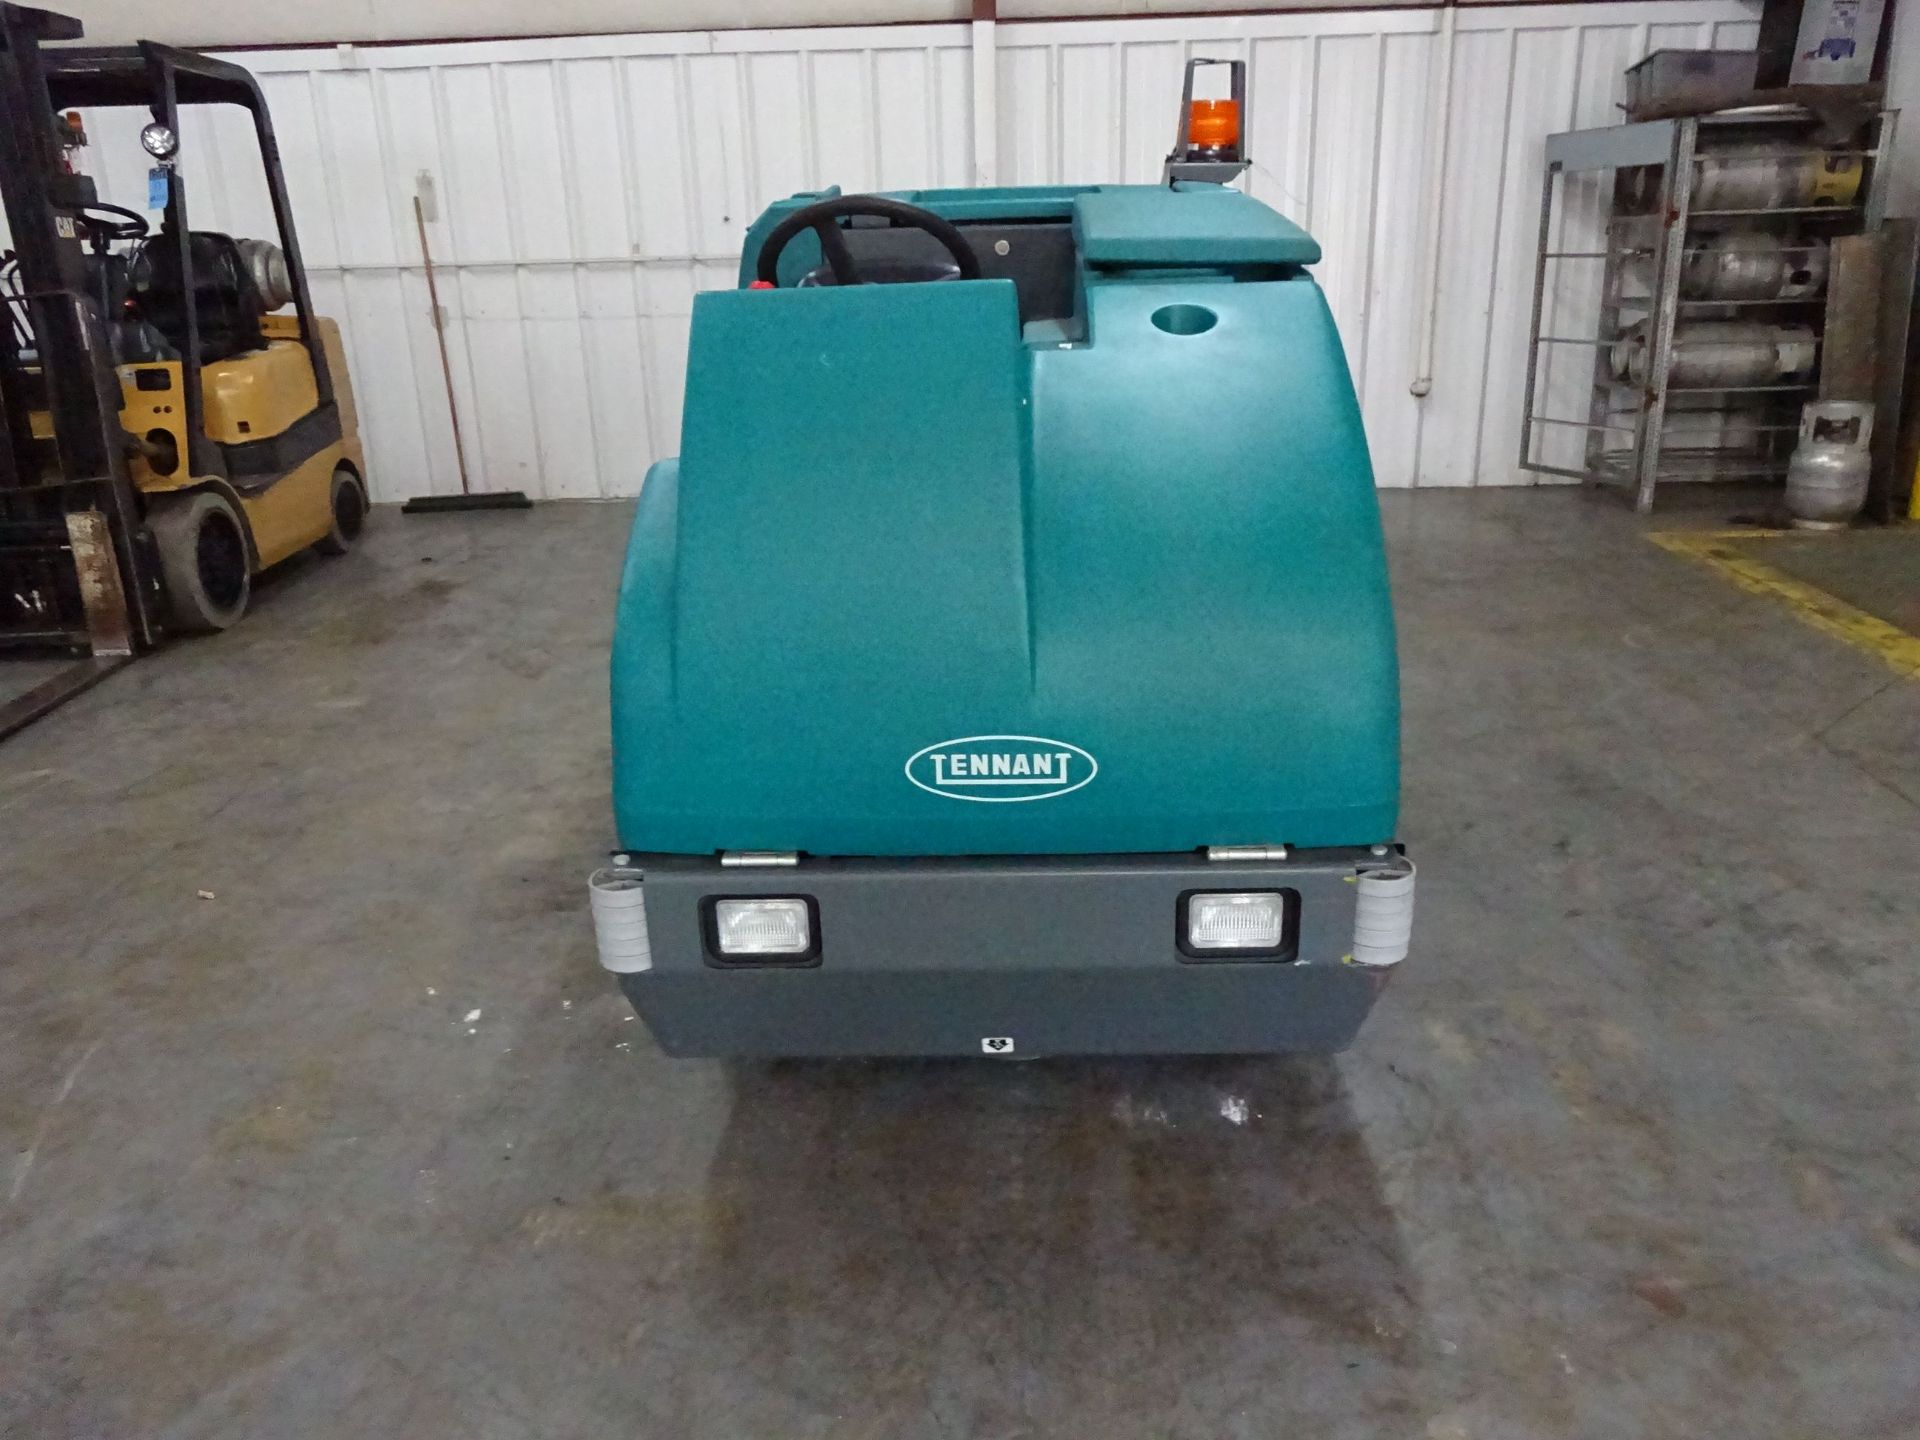 TENNANT MODEL 7300 ELECTRIC SIT DOWN FLOOR SCRUBBER; S/N 7300-5076 (695 HOURS), W/ 36-VOLT CHARGER - - Image 2 of 13